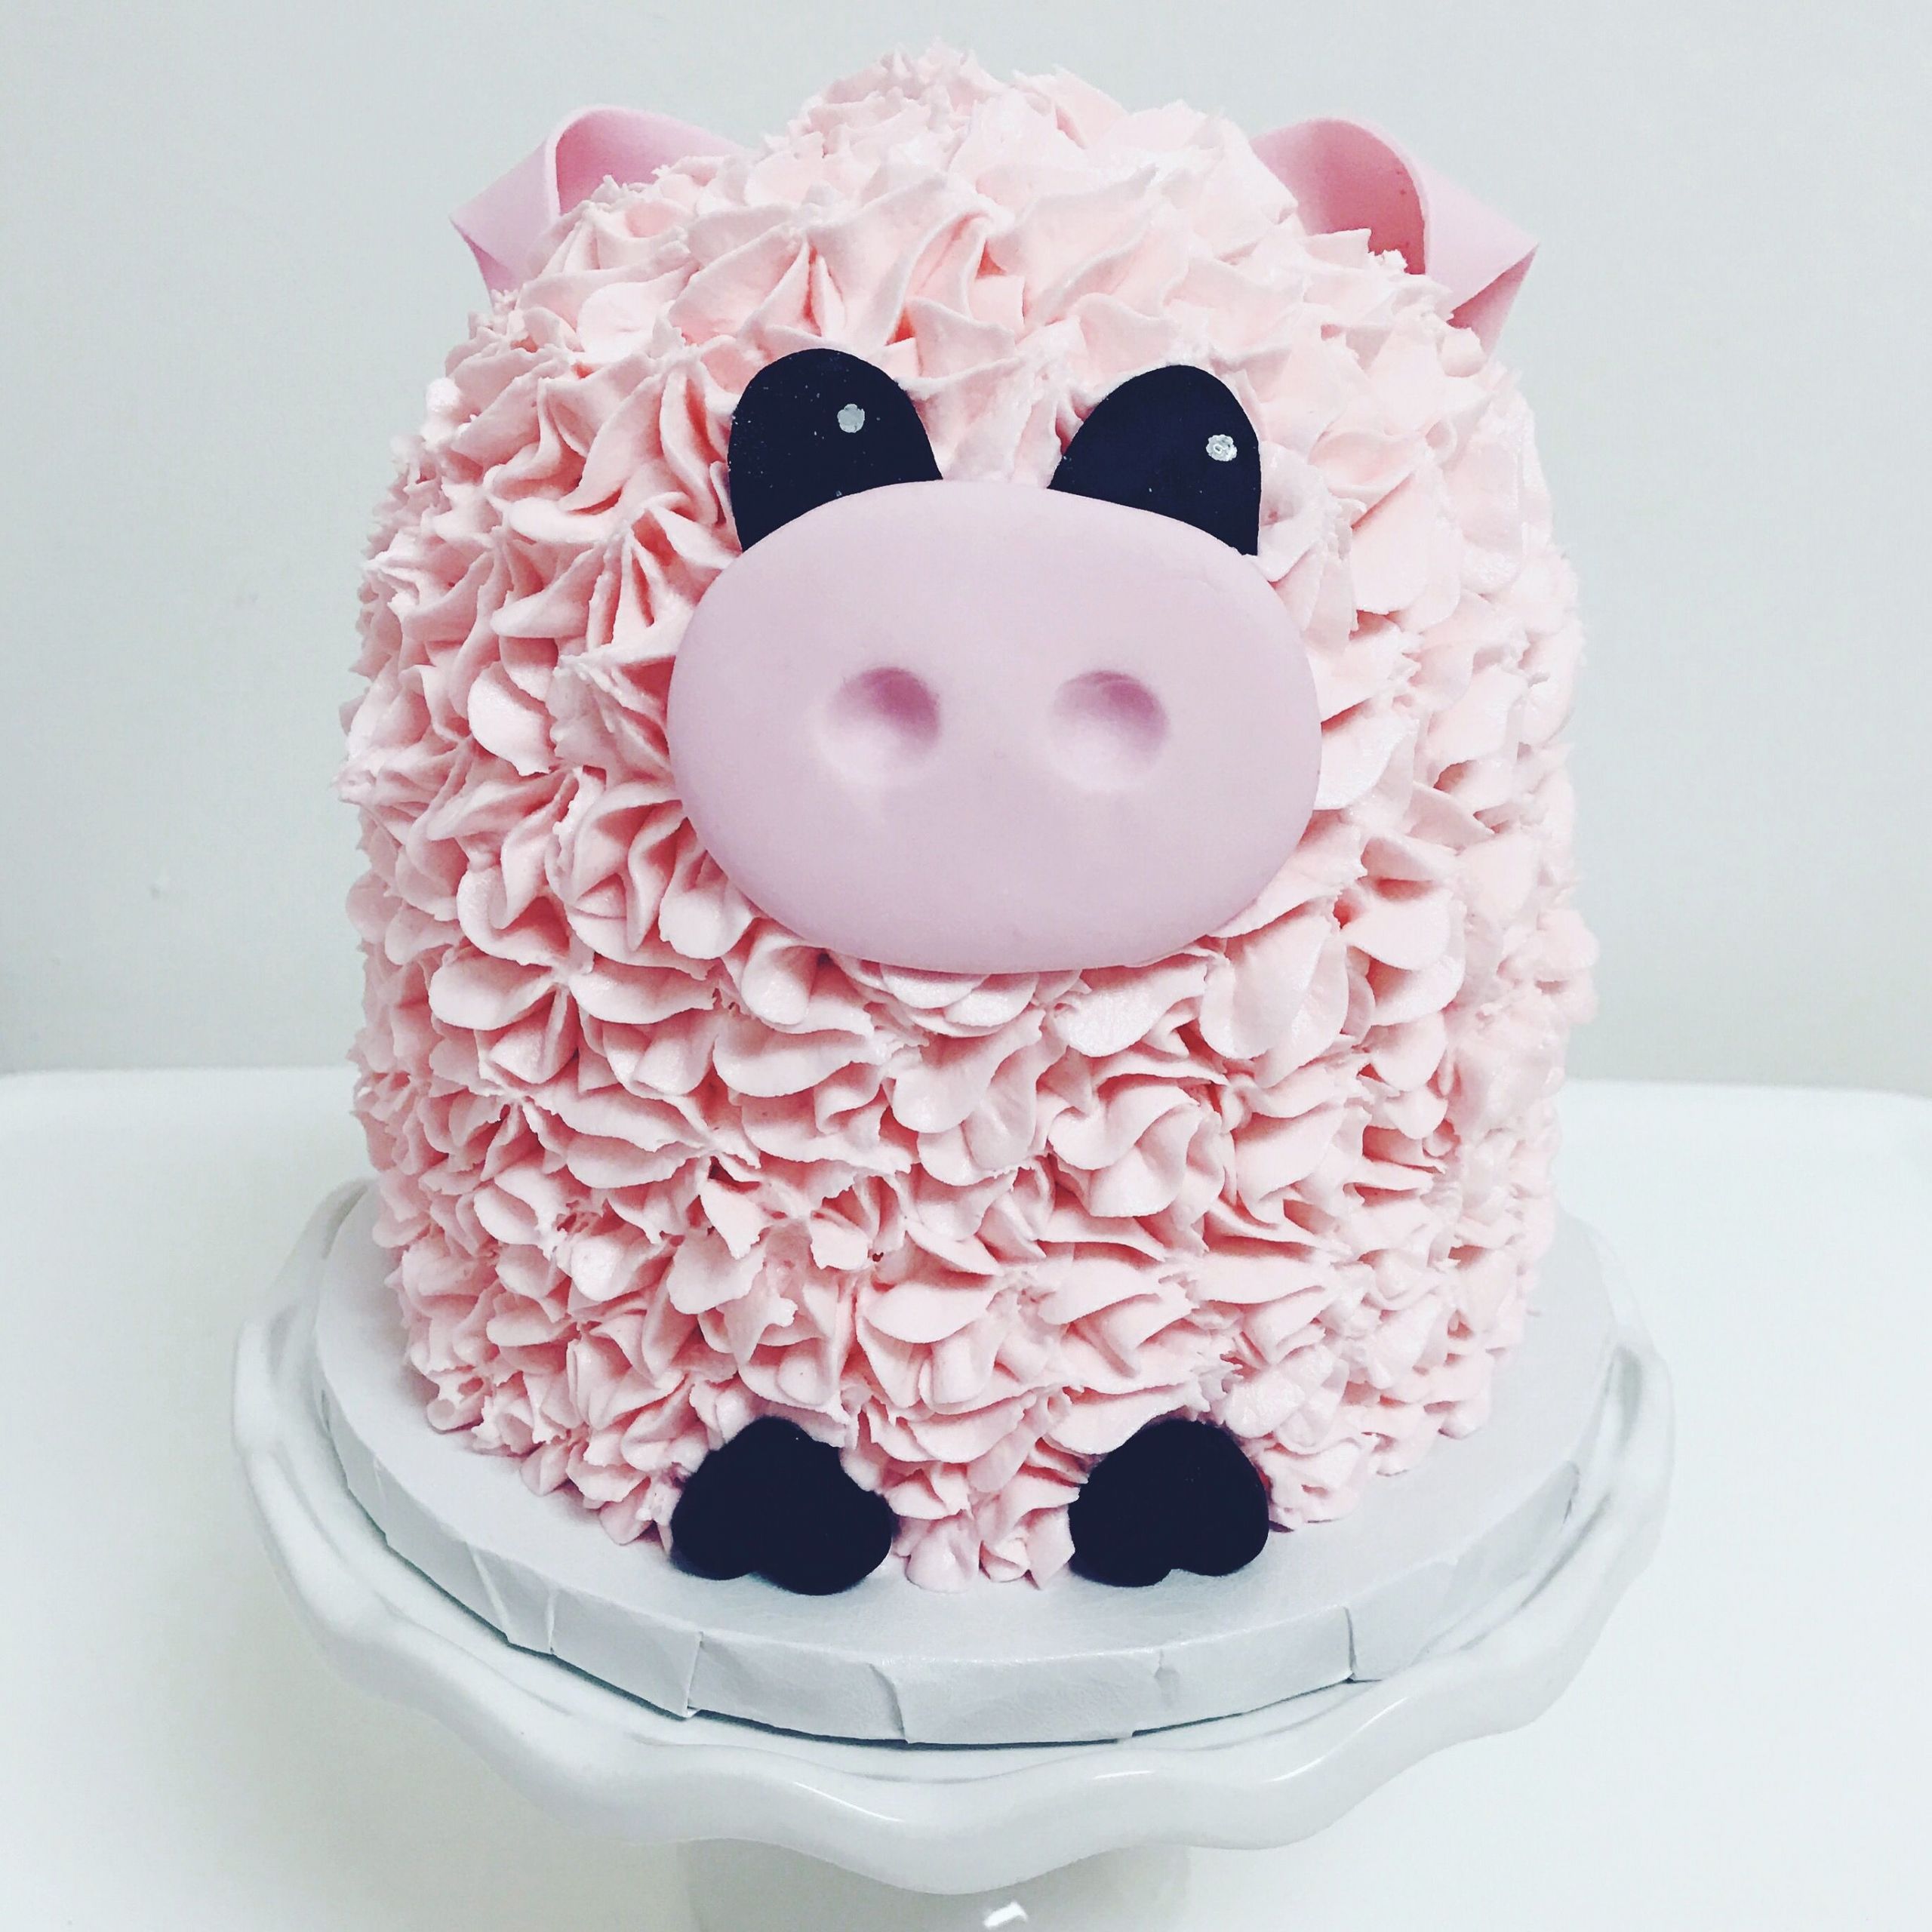 Pig Birthday Cake
 Pig smash cake by Pretty Little Cakes by Lana in 2019